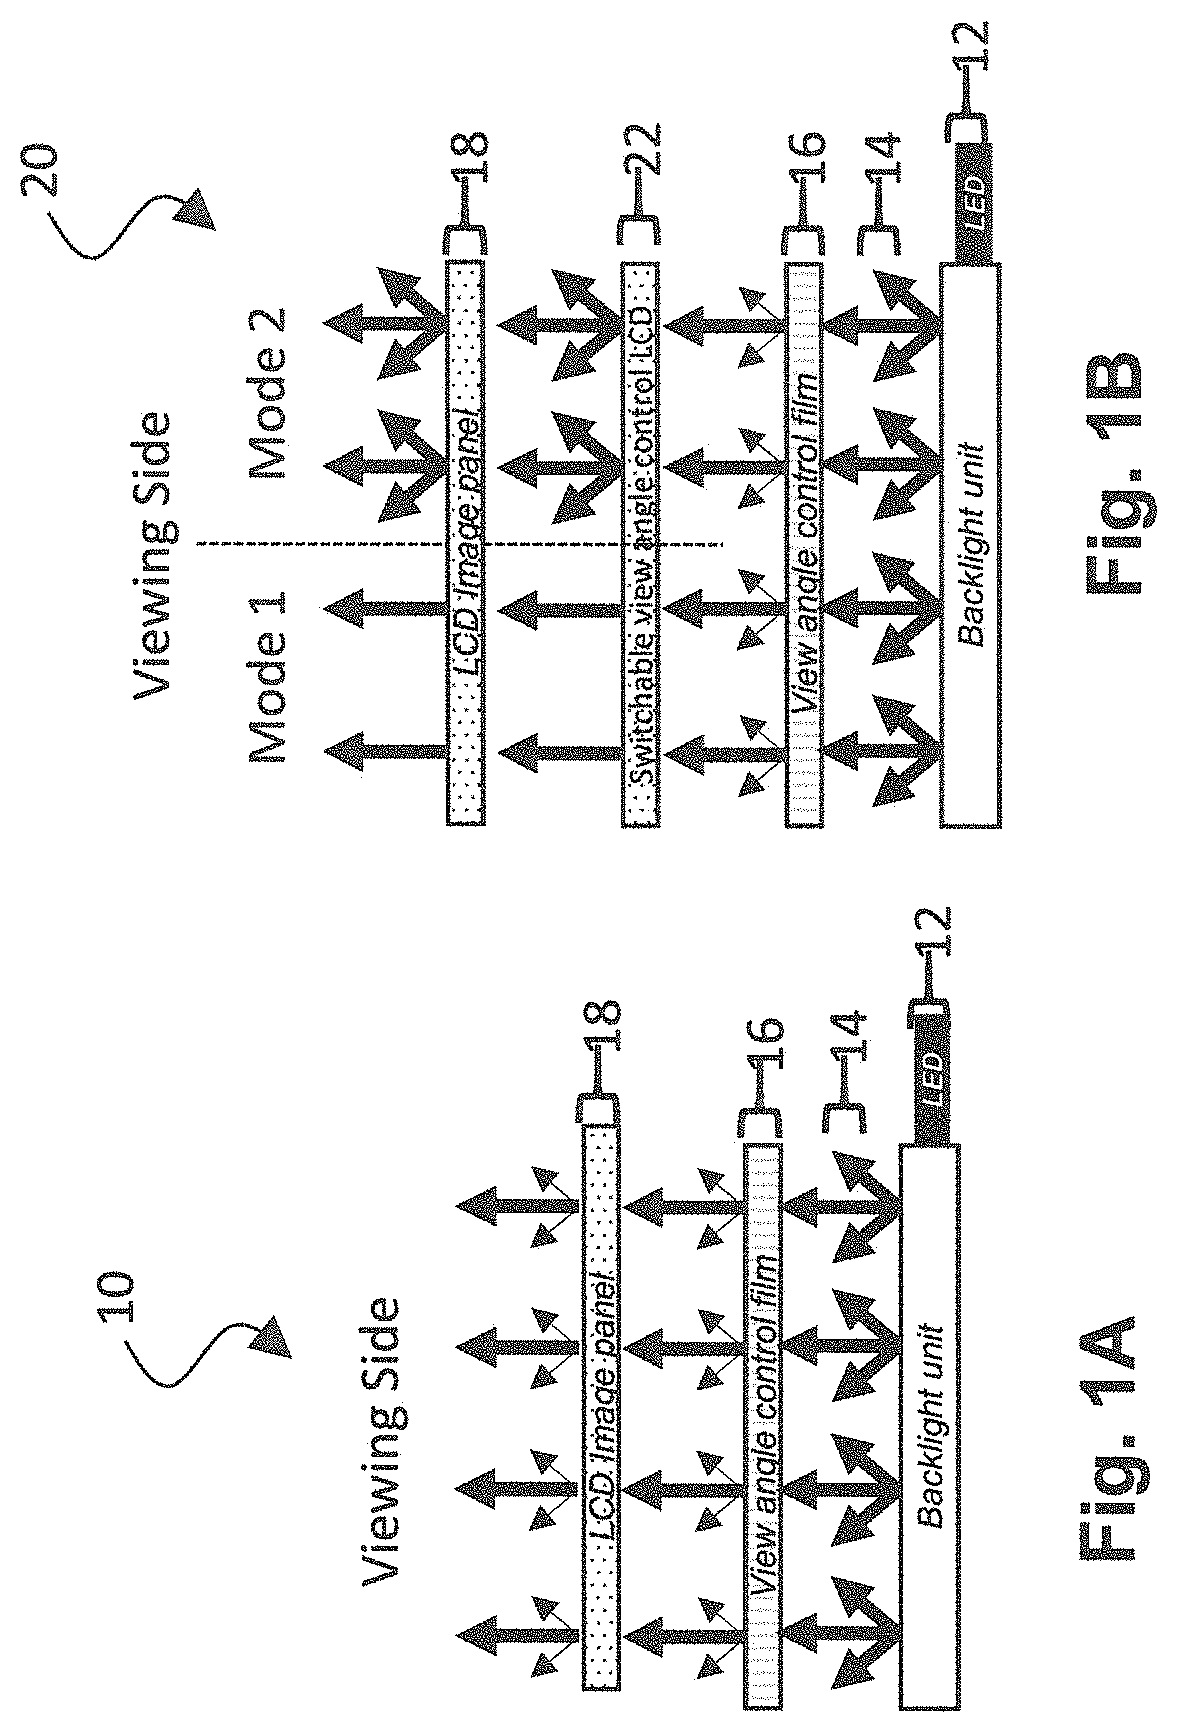 Enhanced privacy switchable backlight system